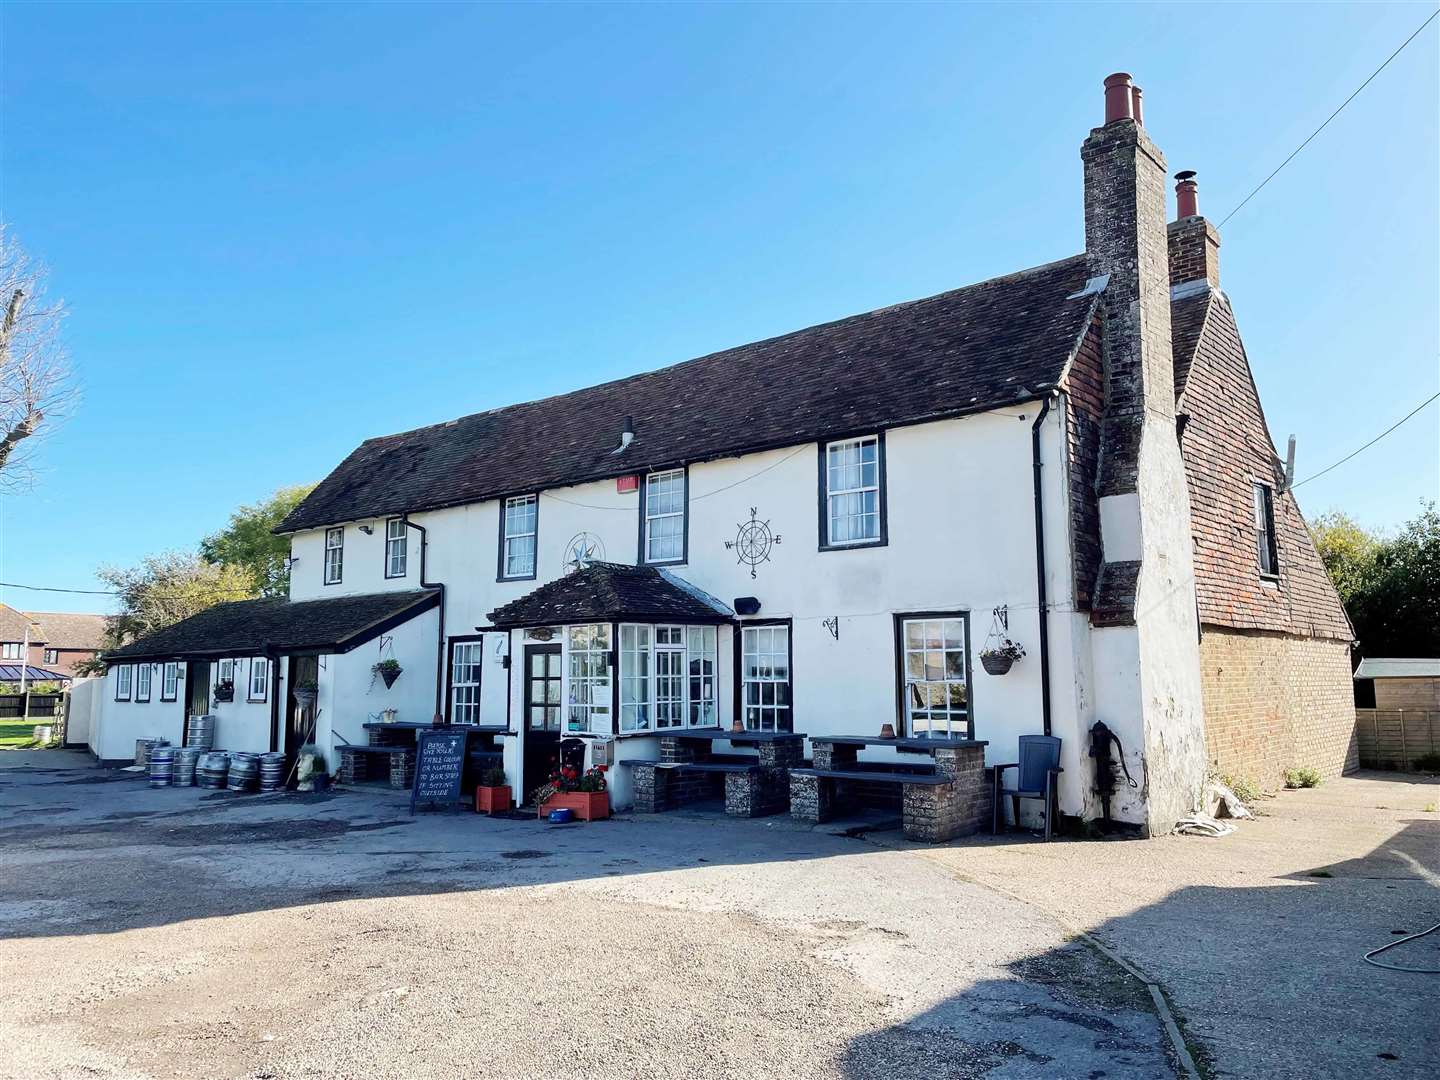 The Star Inn on Romney Marsh is up for sale at auction. Picture: Clive Emson